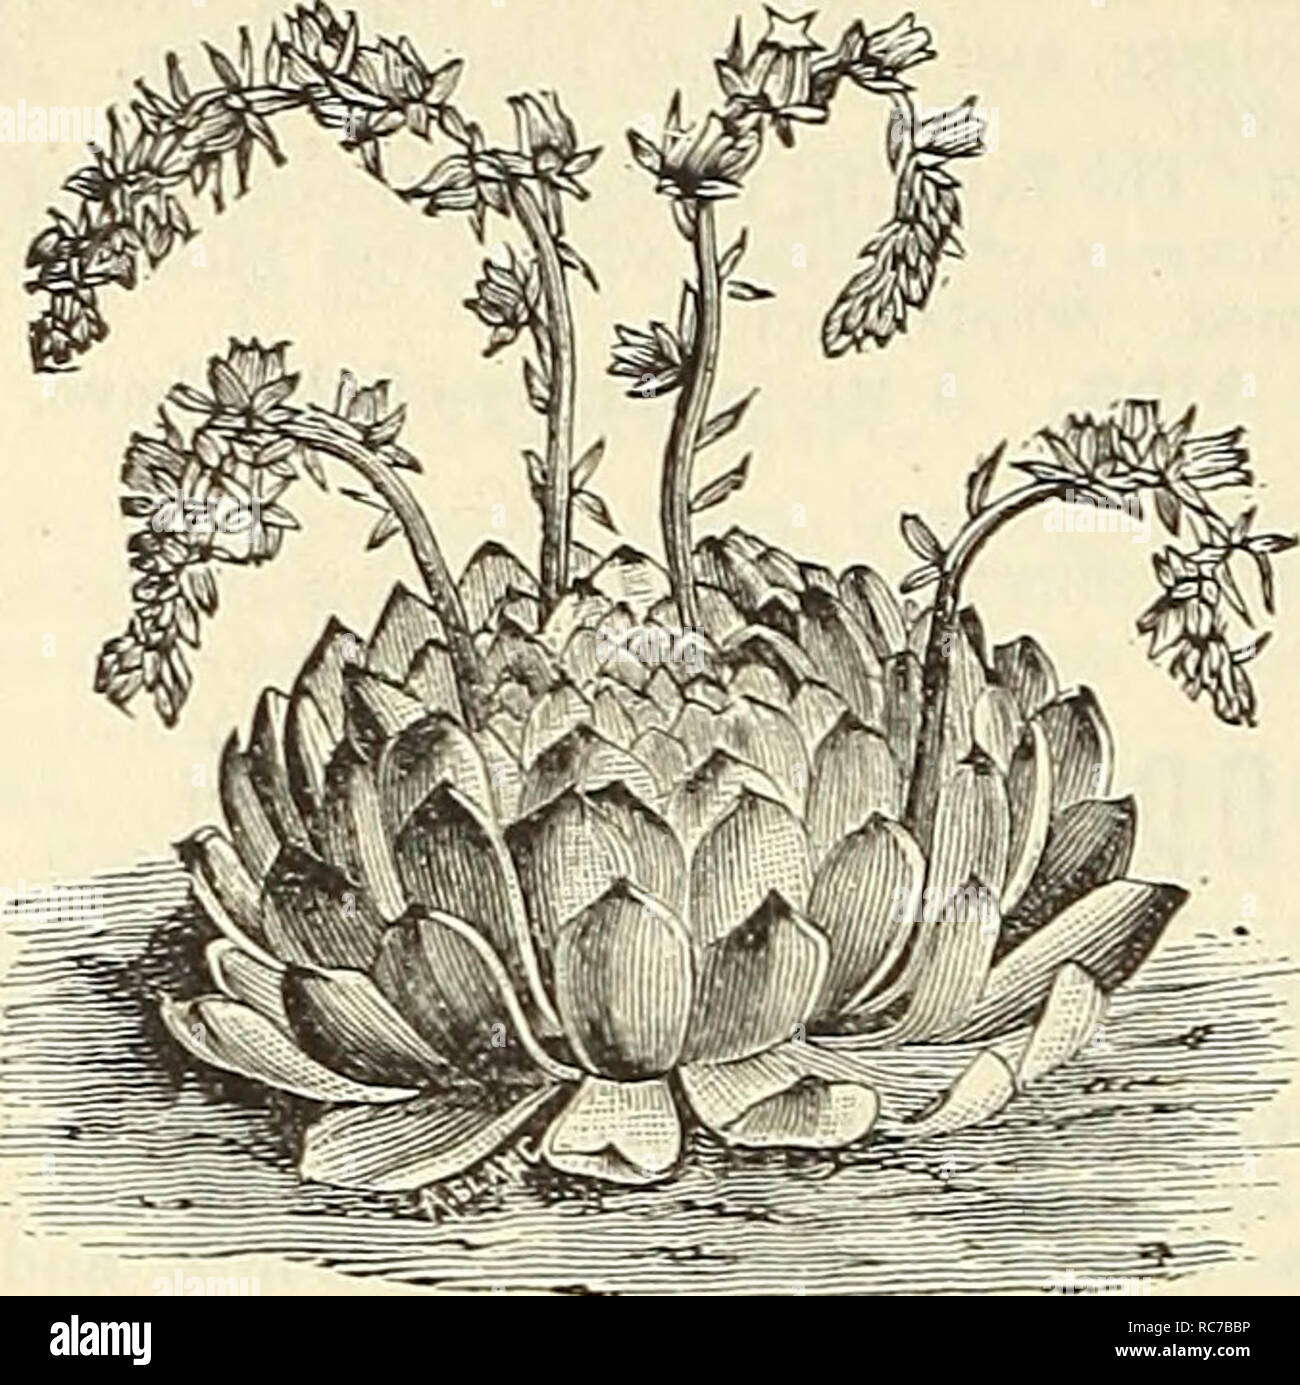 . Dreer's garden calendar for 1887. Seeds Catalogs; Nursery stock Catalogs; Gardening Catalogs; Flowers Seeds Catalogs. 110 DREER'S GARDEN CALENDAR. GENERAL COLLECTION OF. ECHEVERIA SECUNDA GLAUCA. Euonymus radicans variegata. Hardy, small, glossy, pea-green leaves, deeply margined with creamy white, running habit. 20 cts. each ; $2.00 per doz. Eupatorium riparium. Pure white, winter flowering. 25 cts. each. Eupatorium Triste. Large heads of pure white flow- ers. 25 cts. each. Euphorbia jacquiniflora. Handsome orange scarlet flowers, lasting almost the entire winter. 30 cts. each. Ficus (India Stock Photo